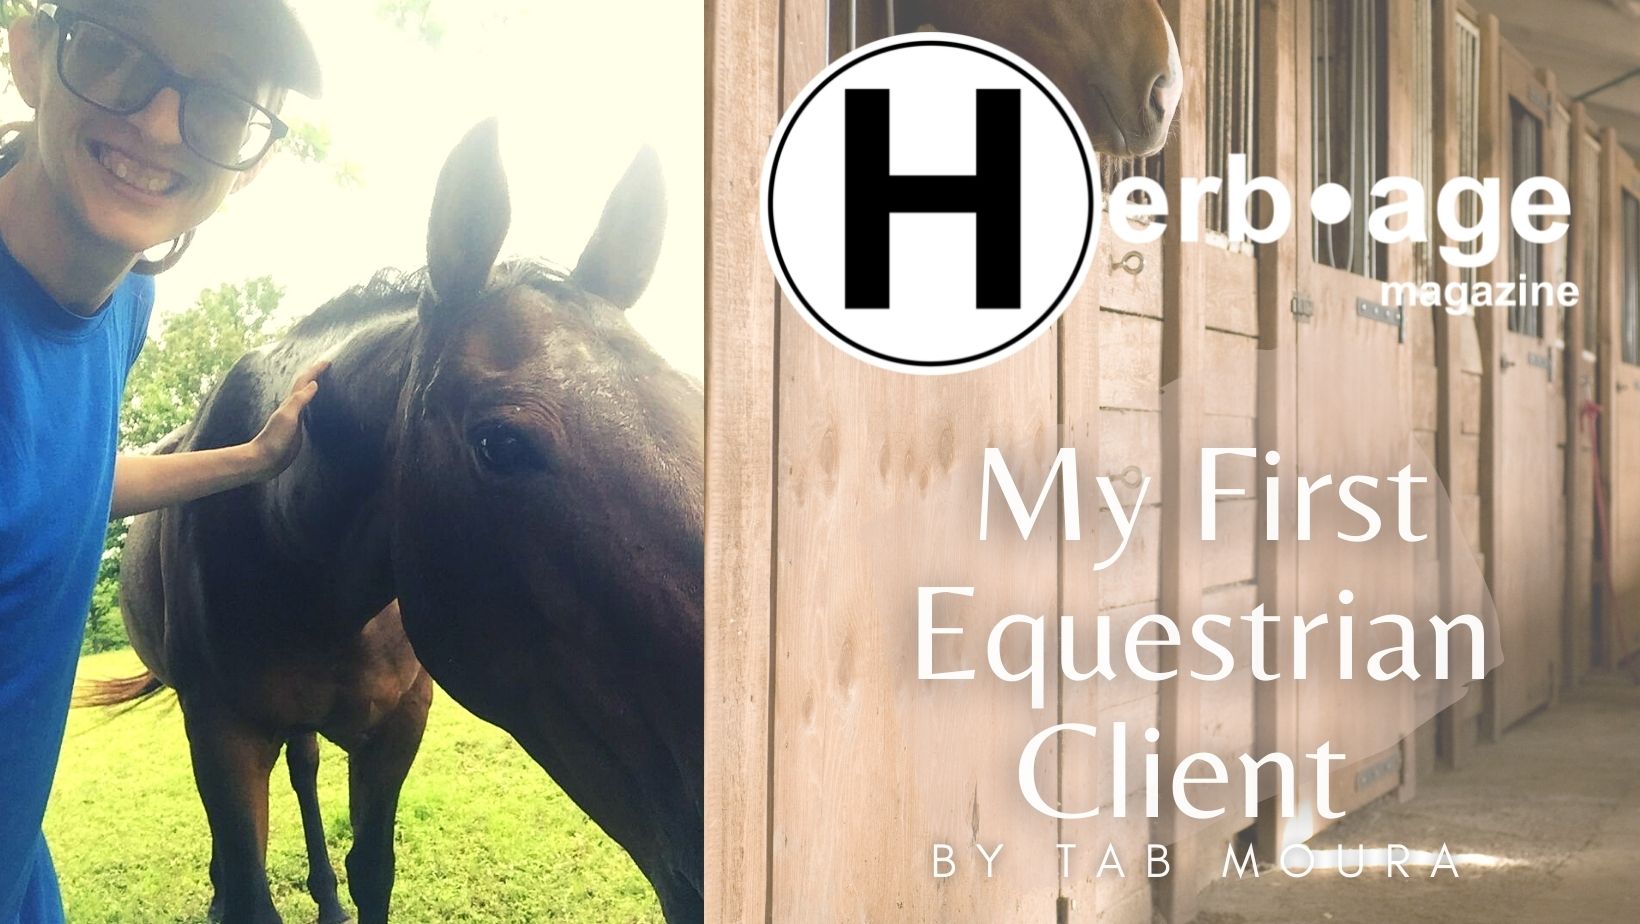 My First Equestrian Client